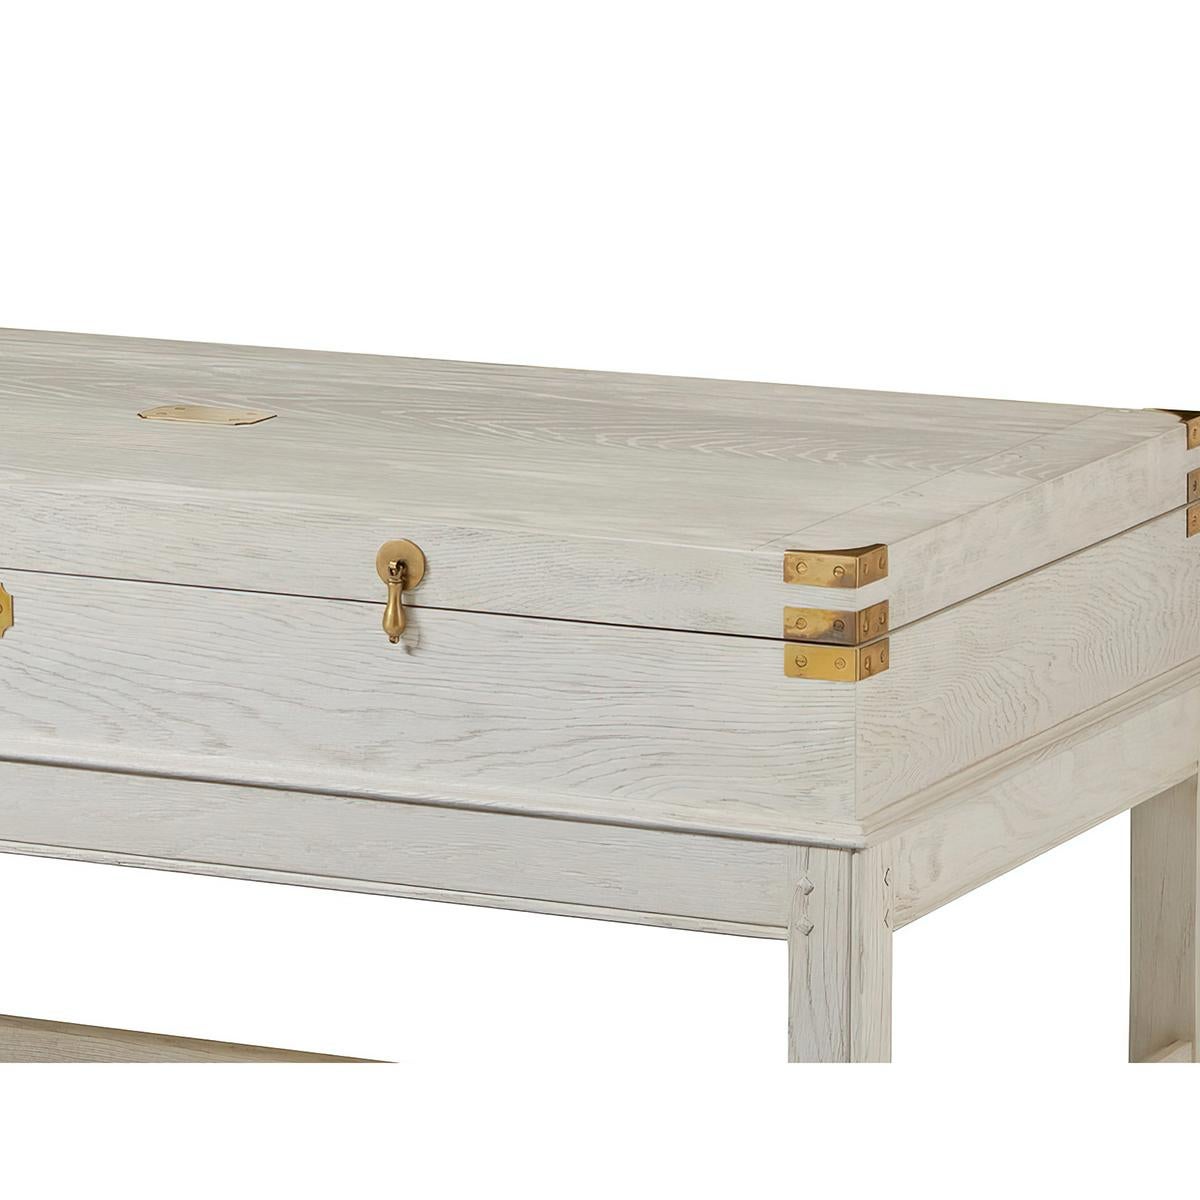 Modern Campaign Coffee Table with a white painted oak finish, with interior storage, brass hardware and mounts in the style of an antique English campaign case. On a stretcher base. 

Dimensions: 48.75